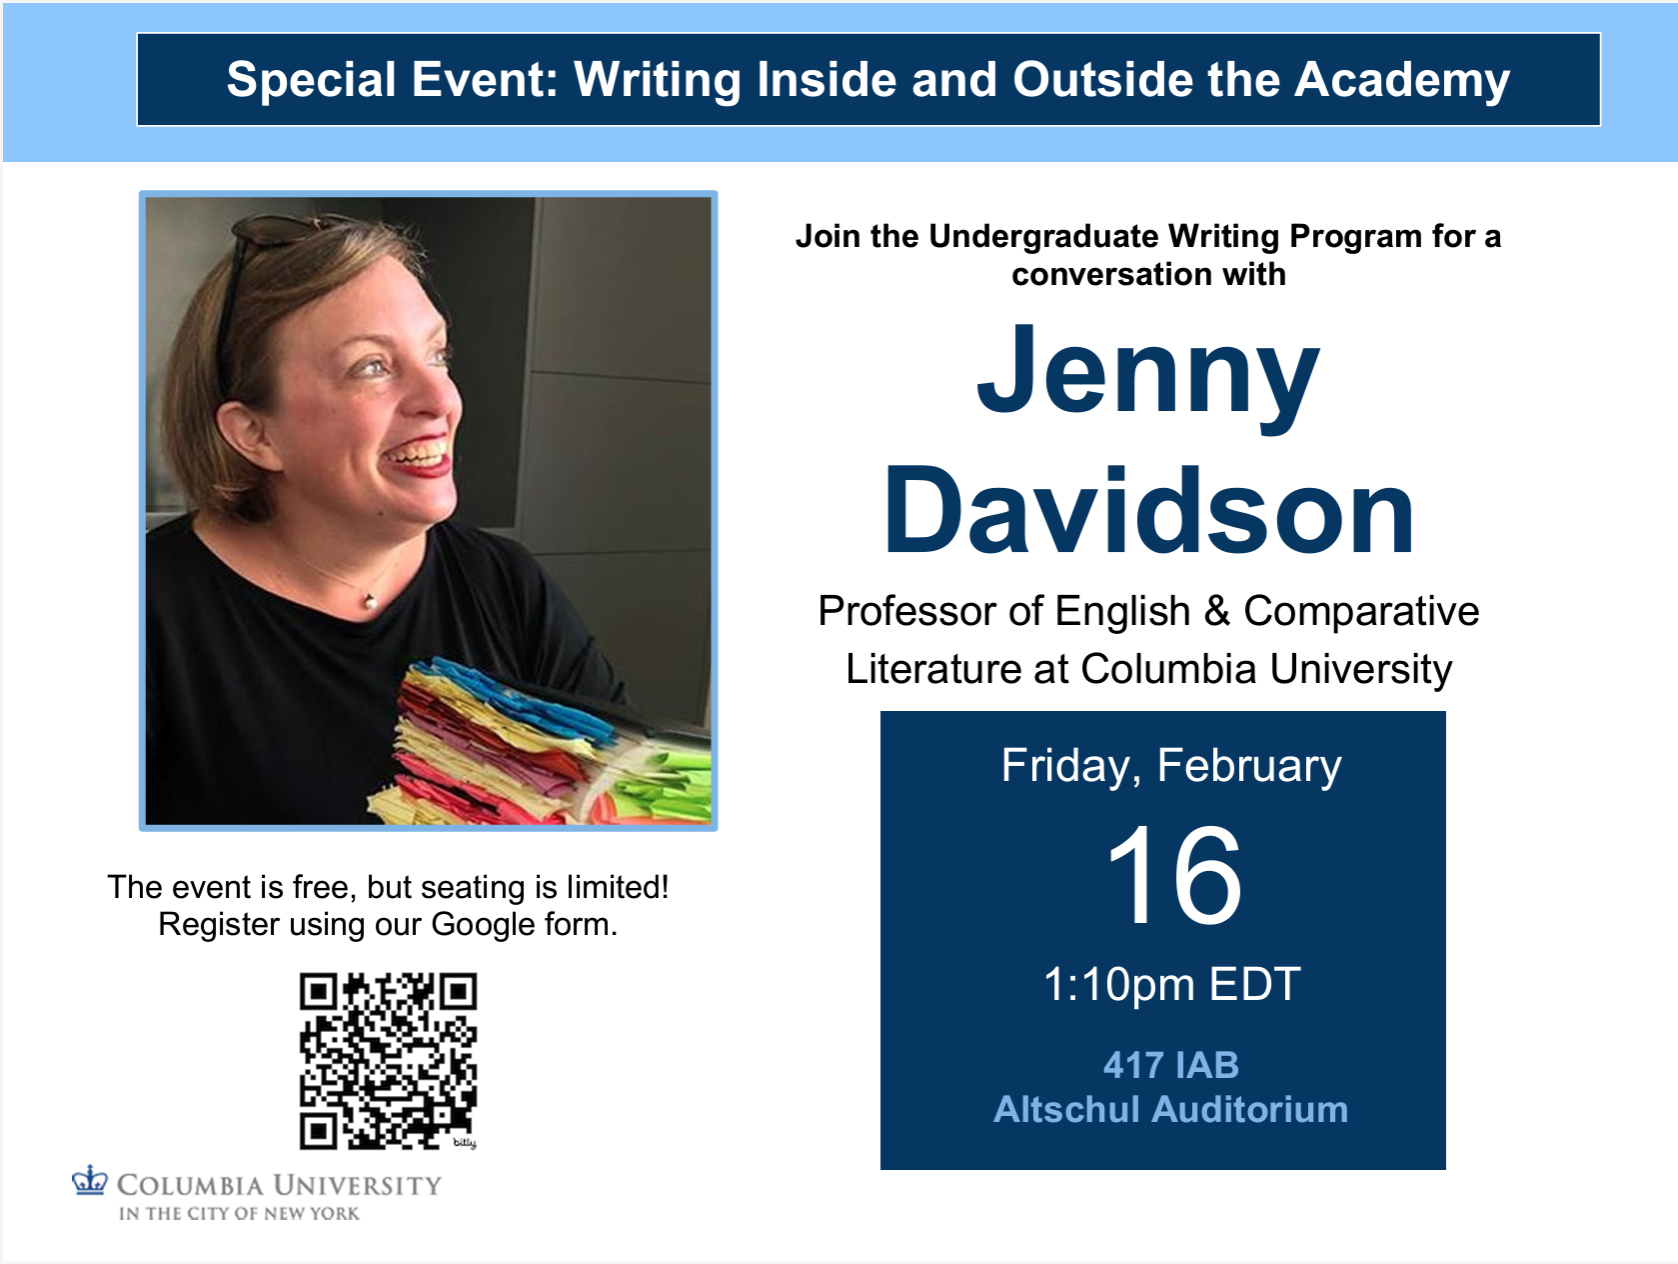 Writing Inside and Outside the Academy with Professor Jenny Davidson